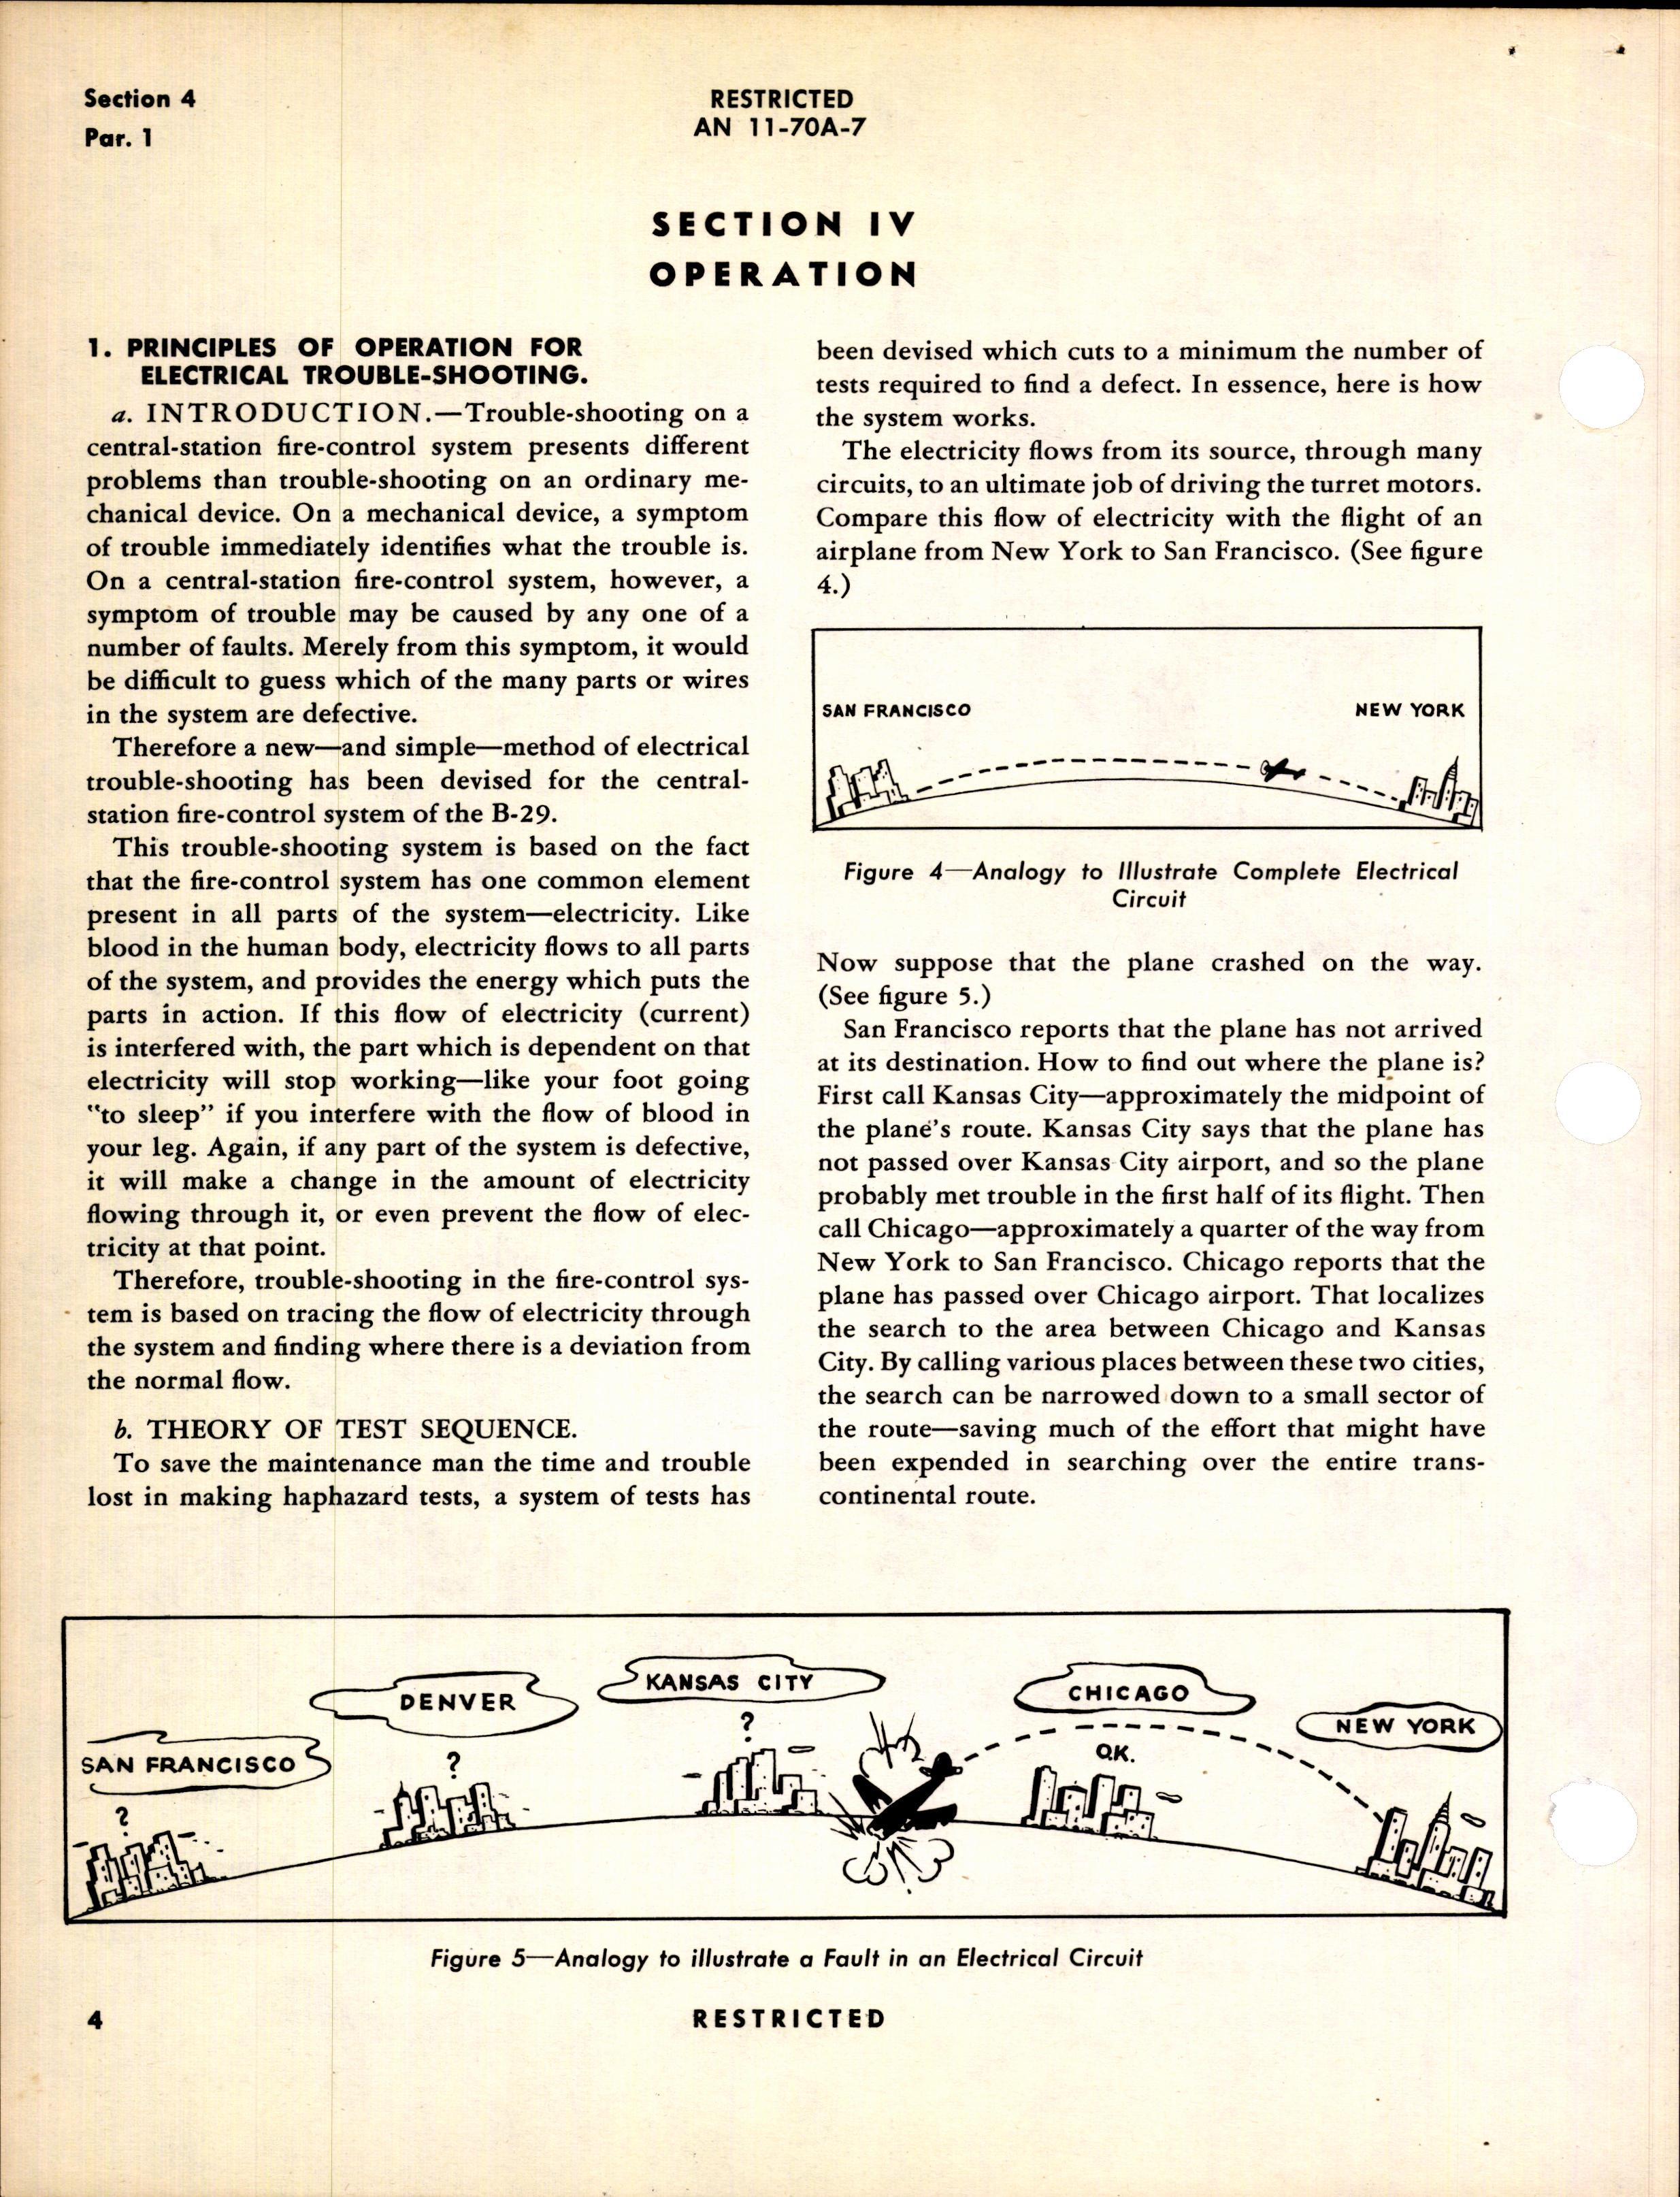 Sample page 8 from AirCorps Library document: Operation & Service Instructions for Central-Station Fire-Control Tester